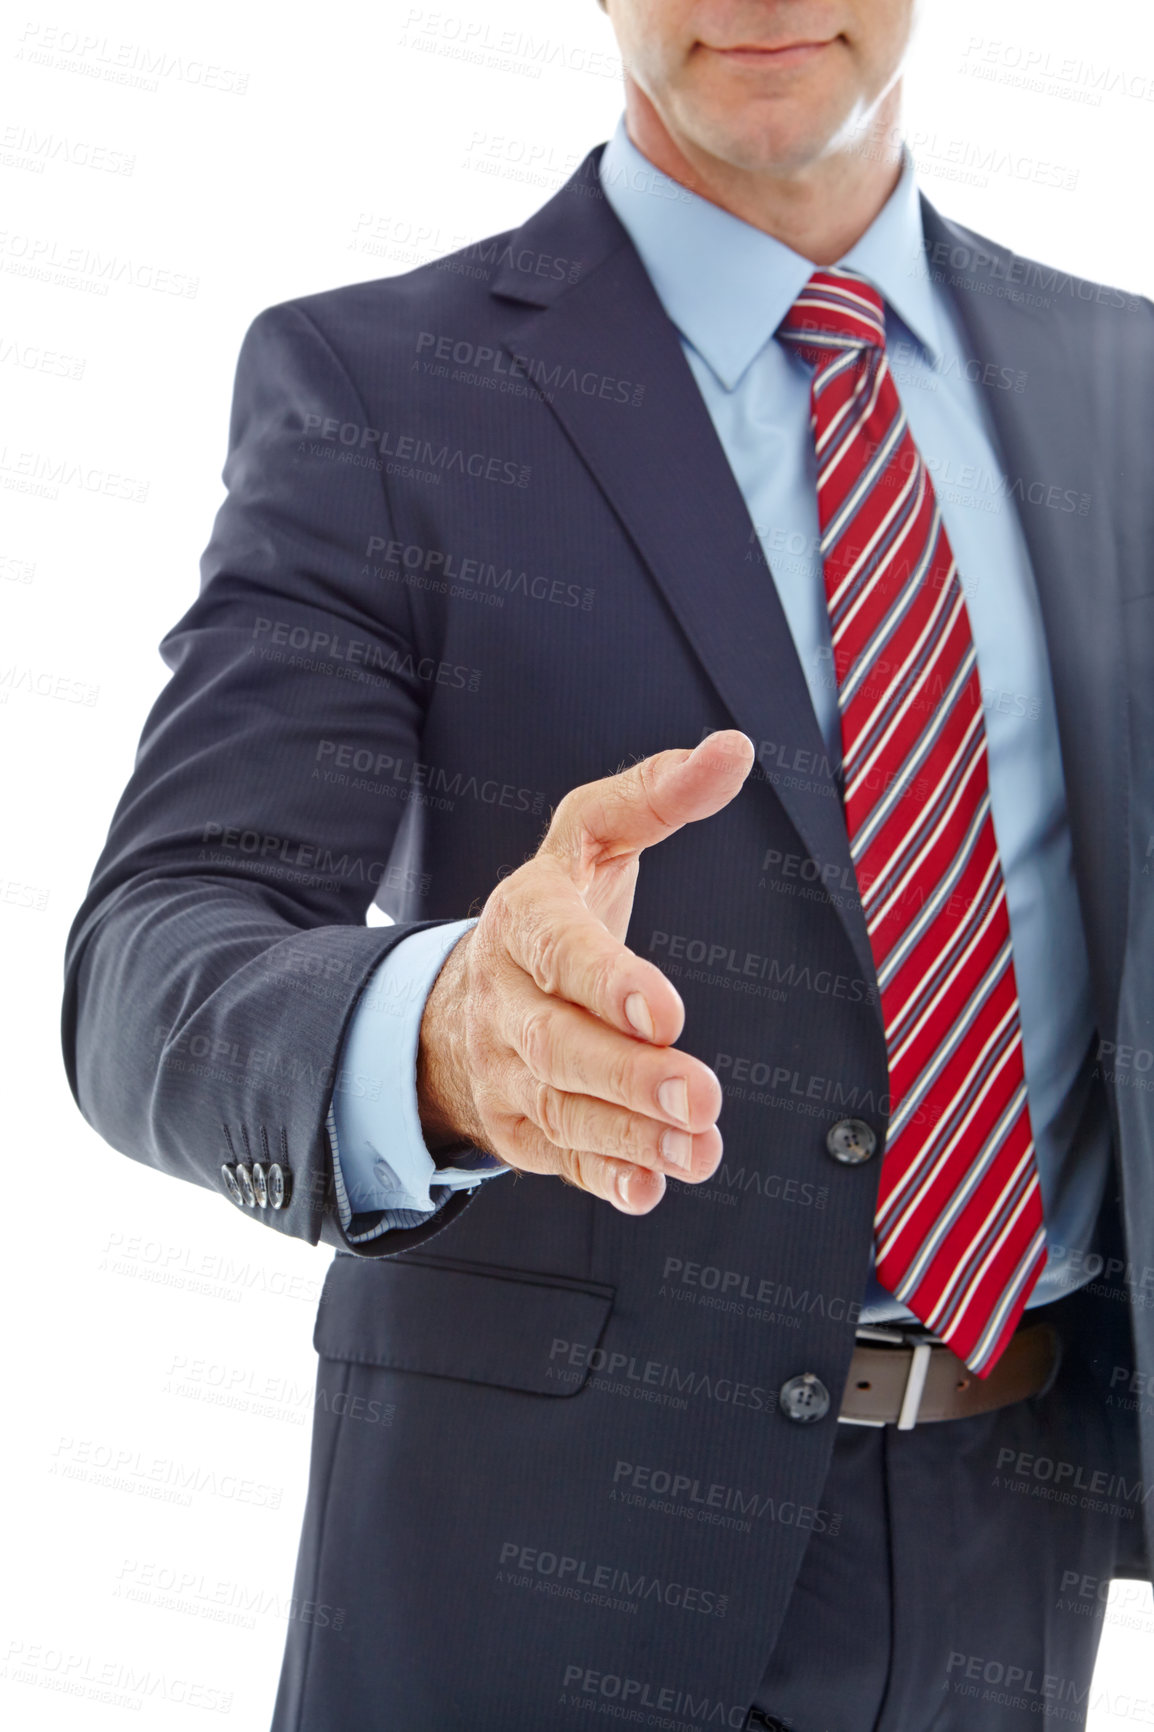 Buy stock photo Cropped studio shot of a businessman extending his arm to shake hands